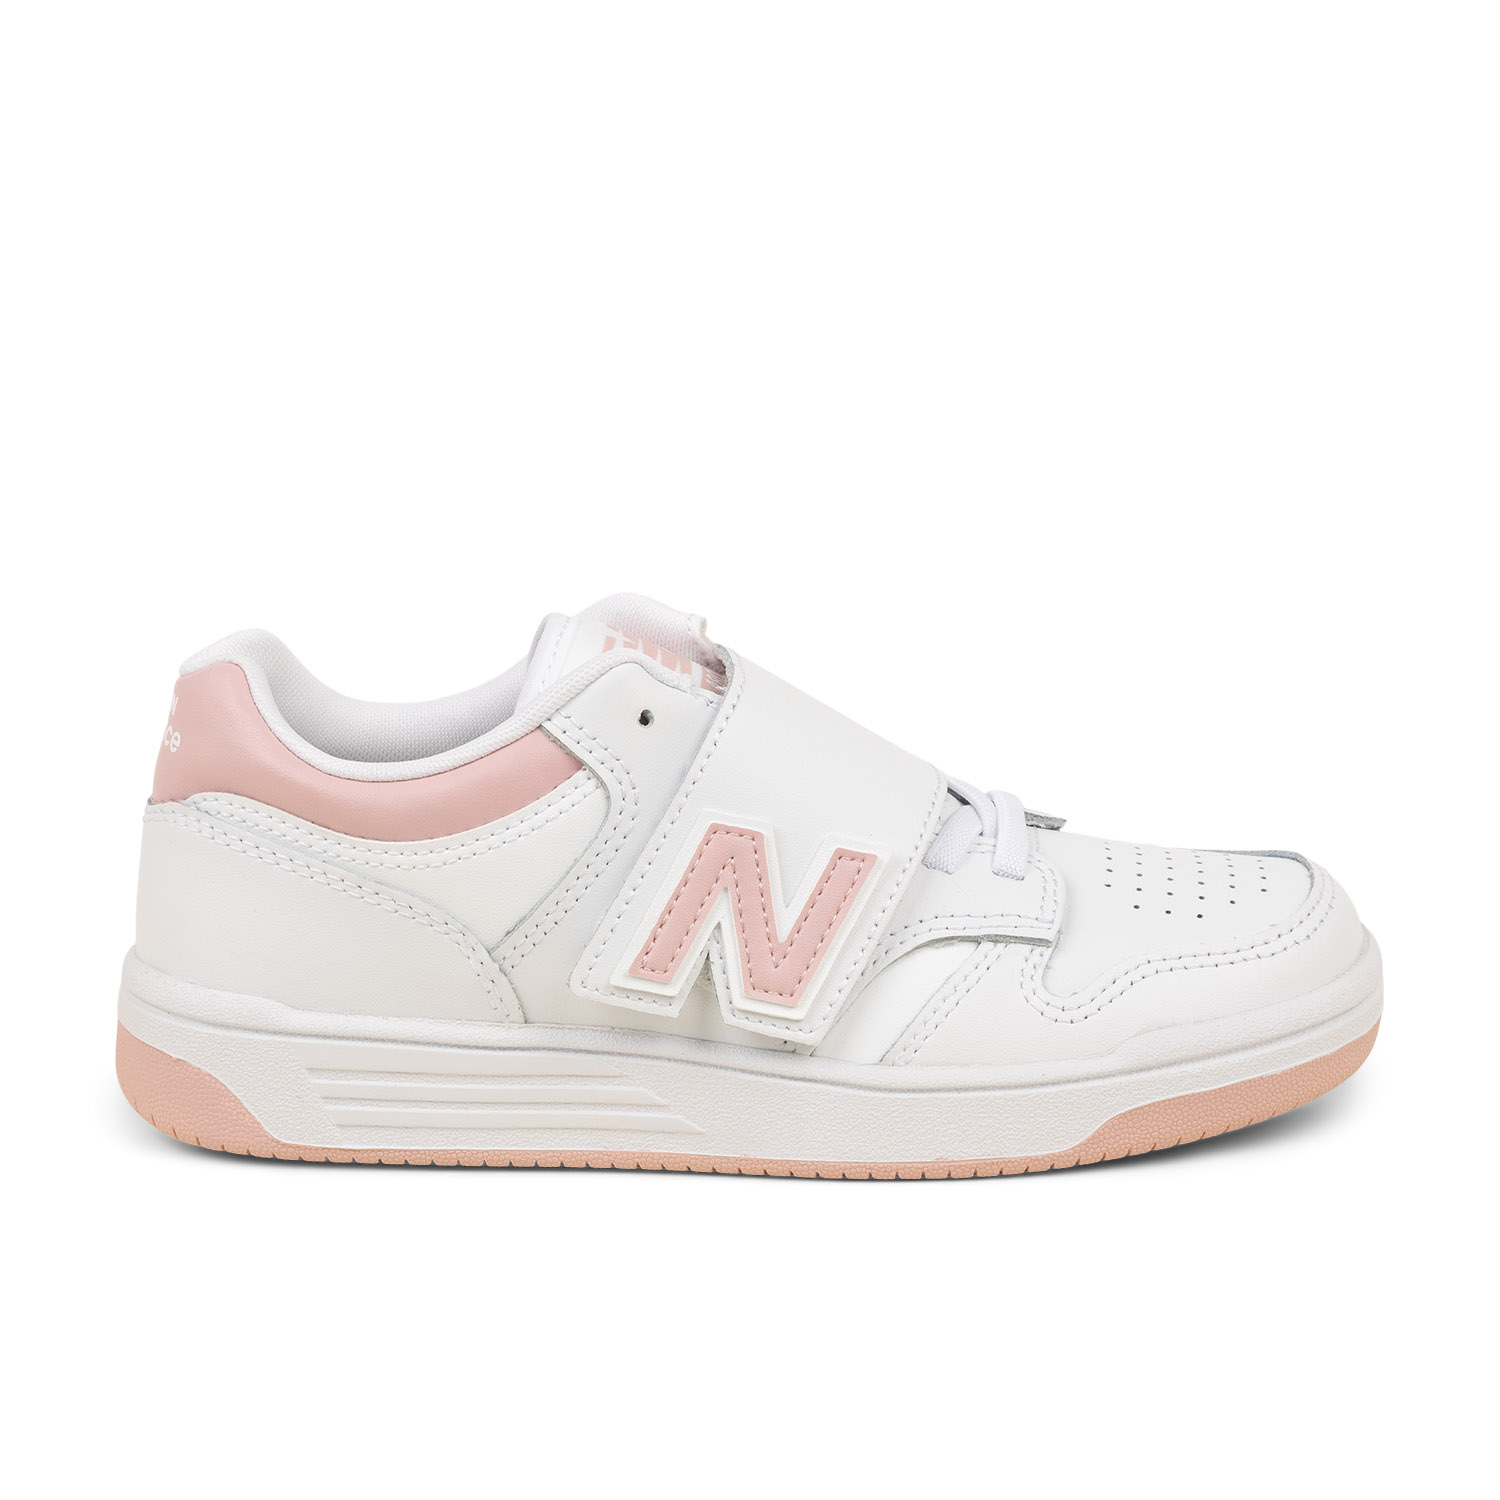 01 - 480 - NEW BALANCE -  - Synthétique